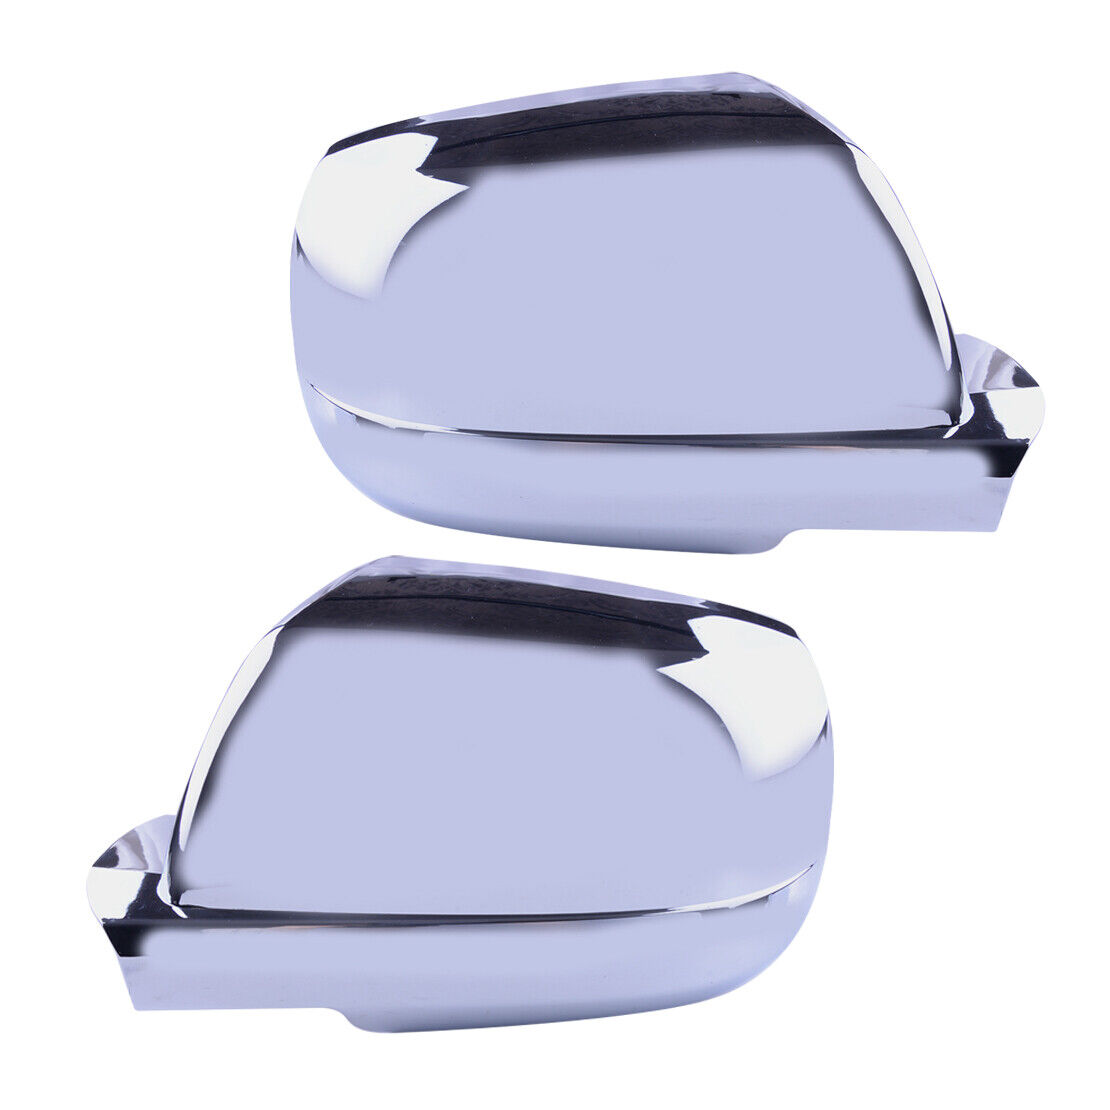 Car Chrome Mirror Cover Trim Overlay Fit For Toyota Tundra Sequoia 2007-2020 Hot